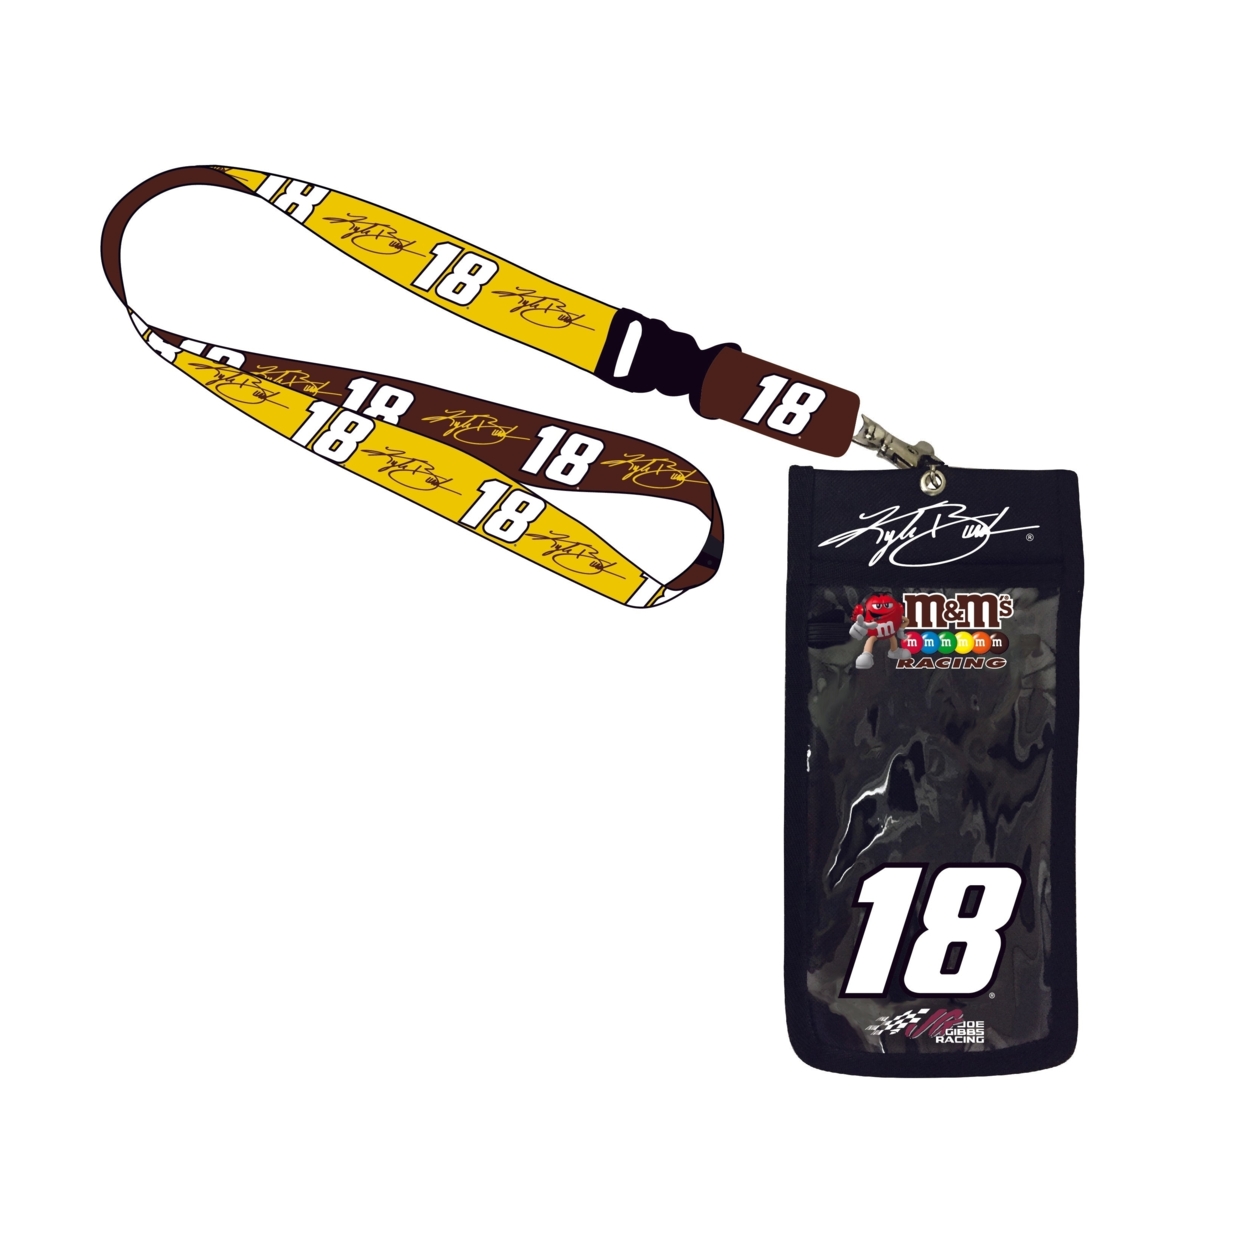 Kyle Busch #18 Racing Nascar Deluxe Credential Holder W/Lanyard New For 2020